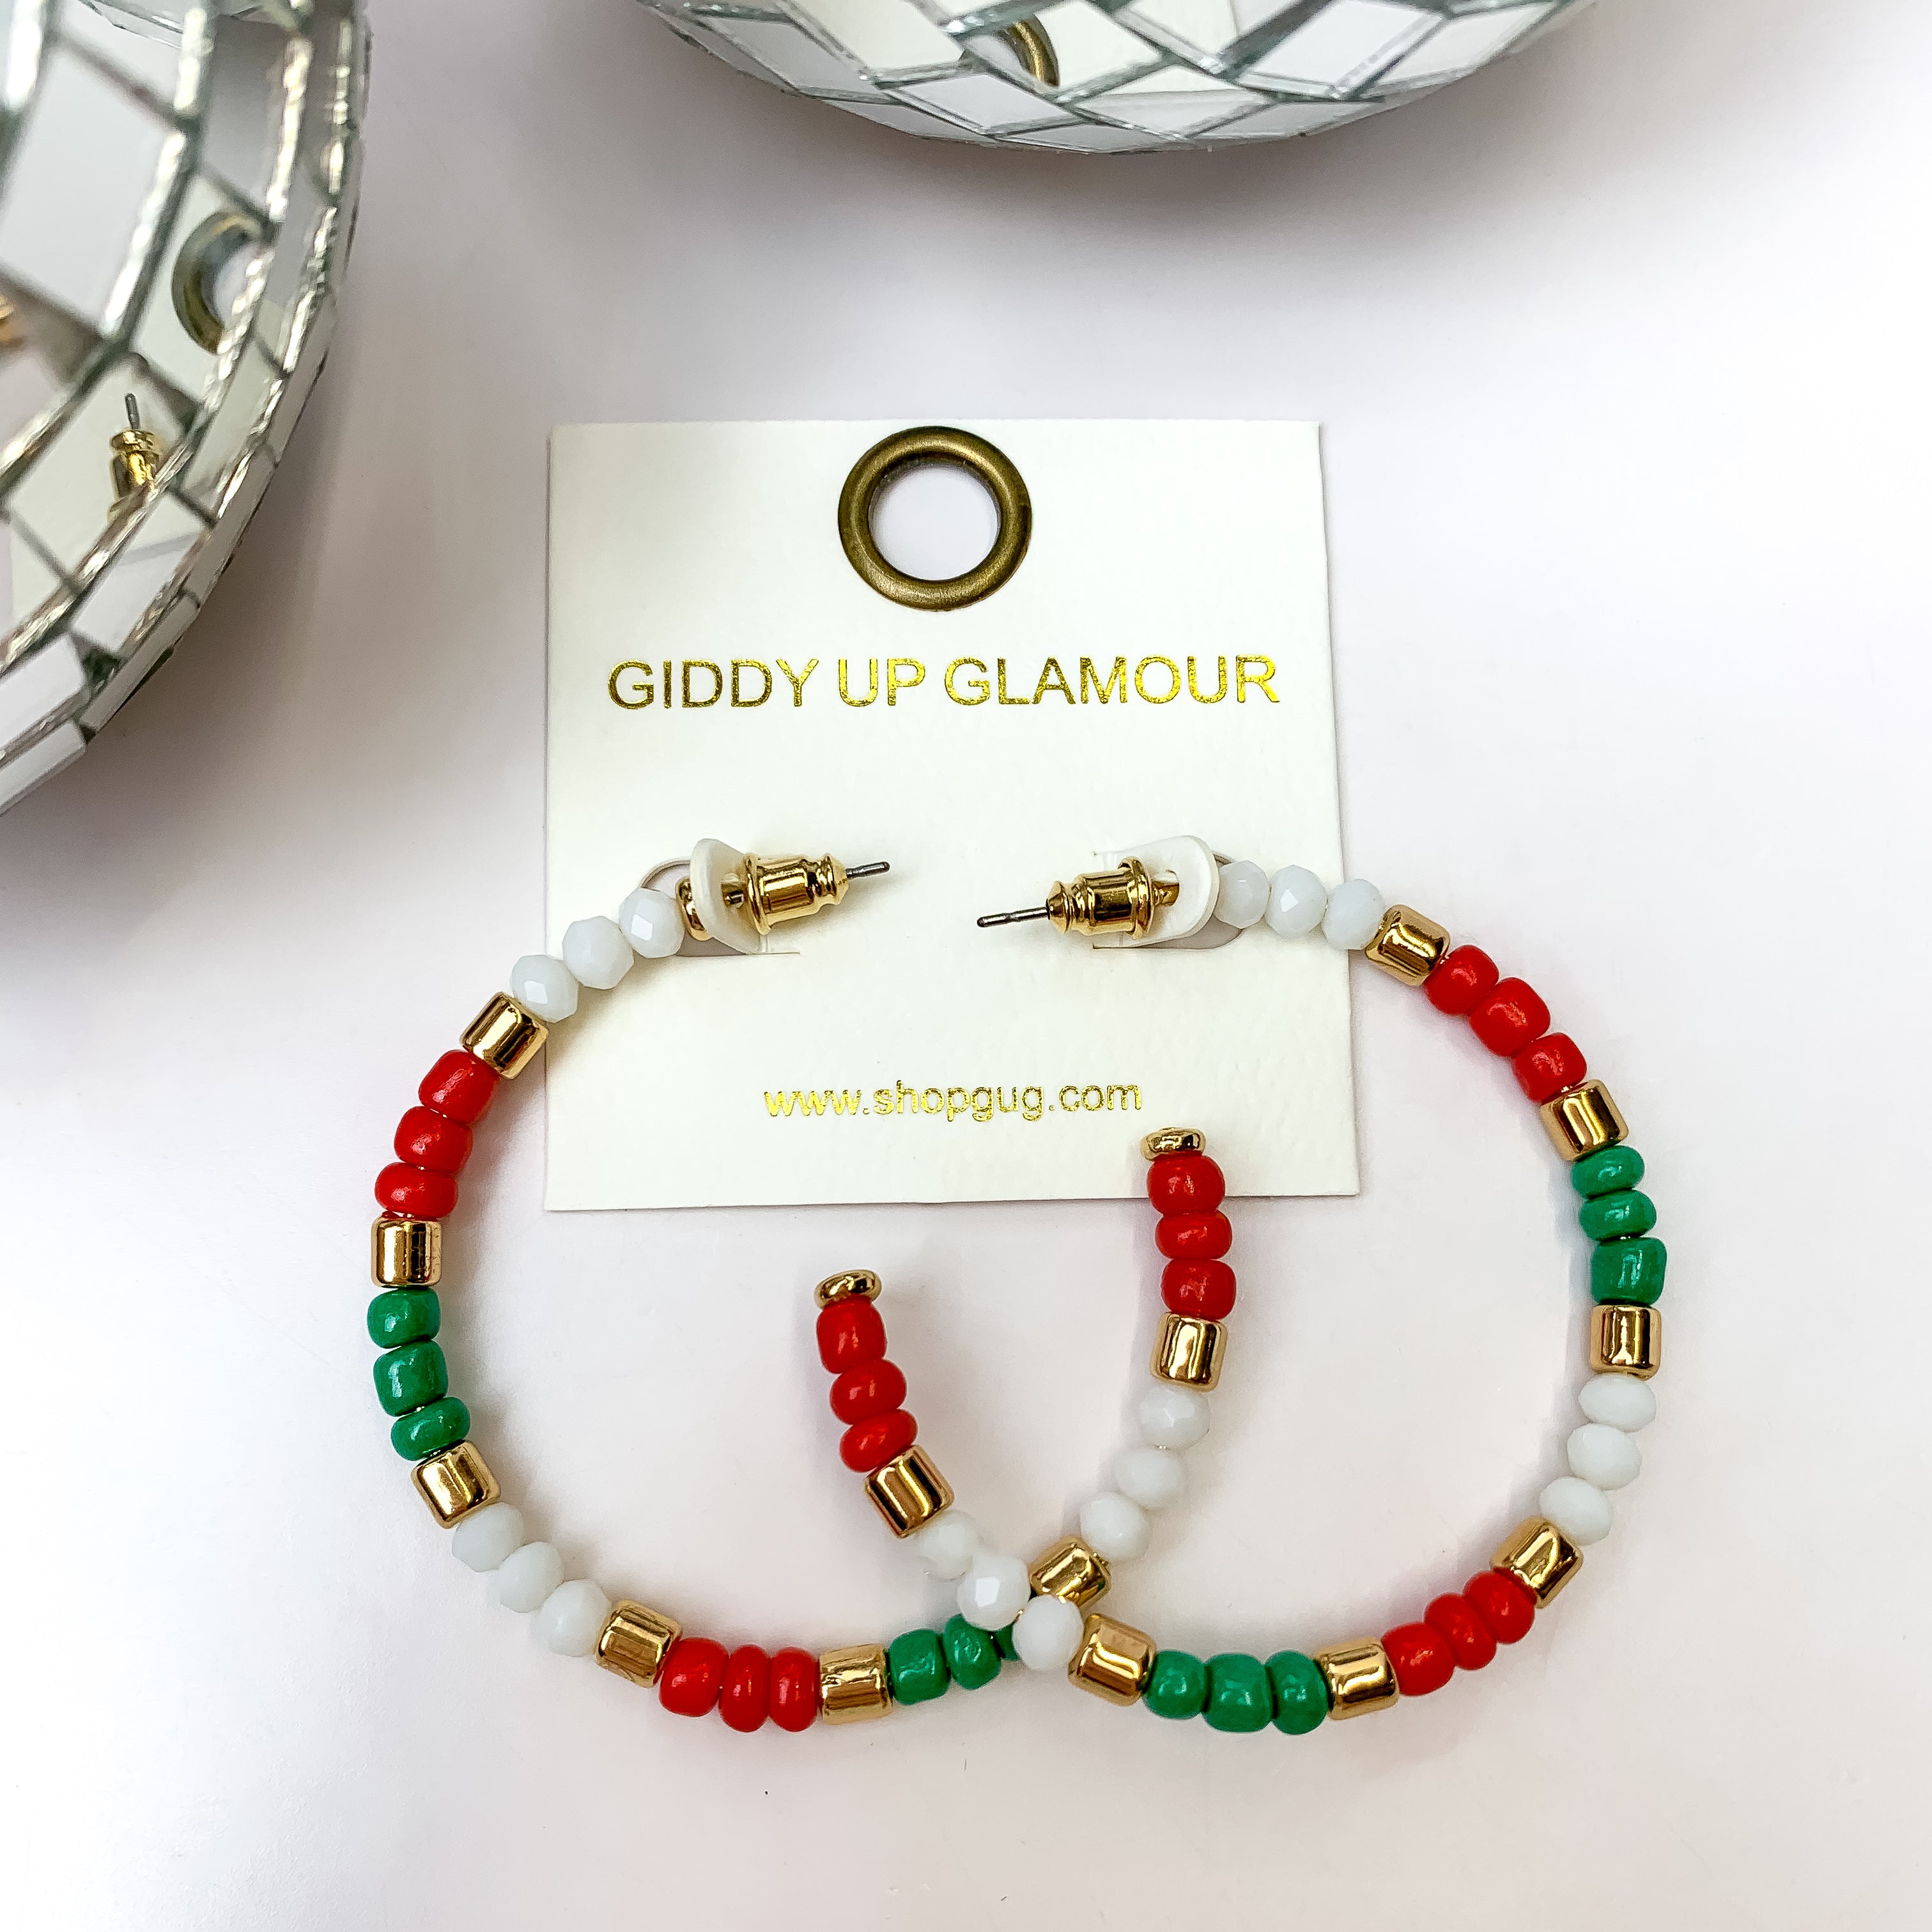 A pair of gold tone, red, white, and green hoop earrings on an ivory earring card. These earrings are pictured with disco balls and a white background.